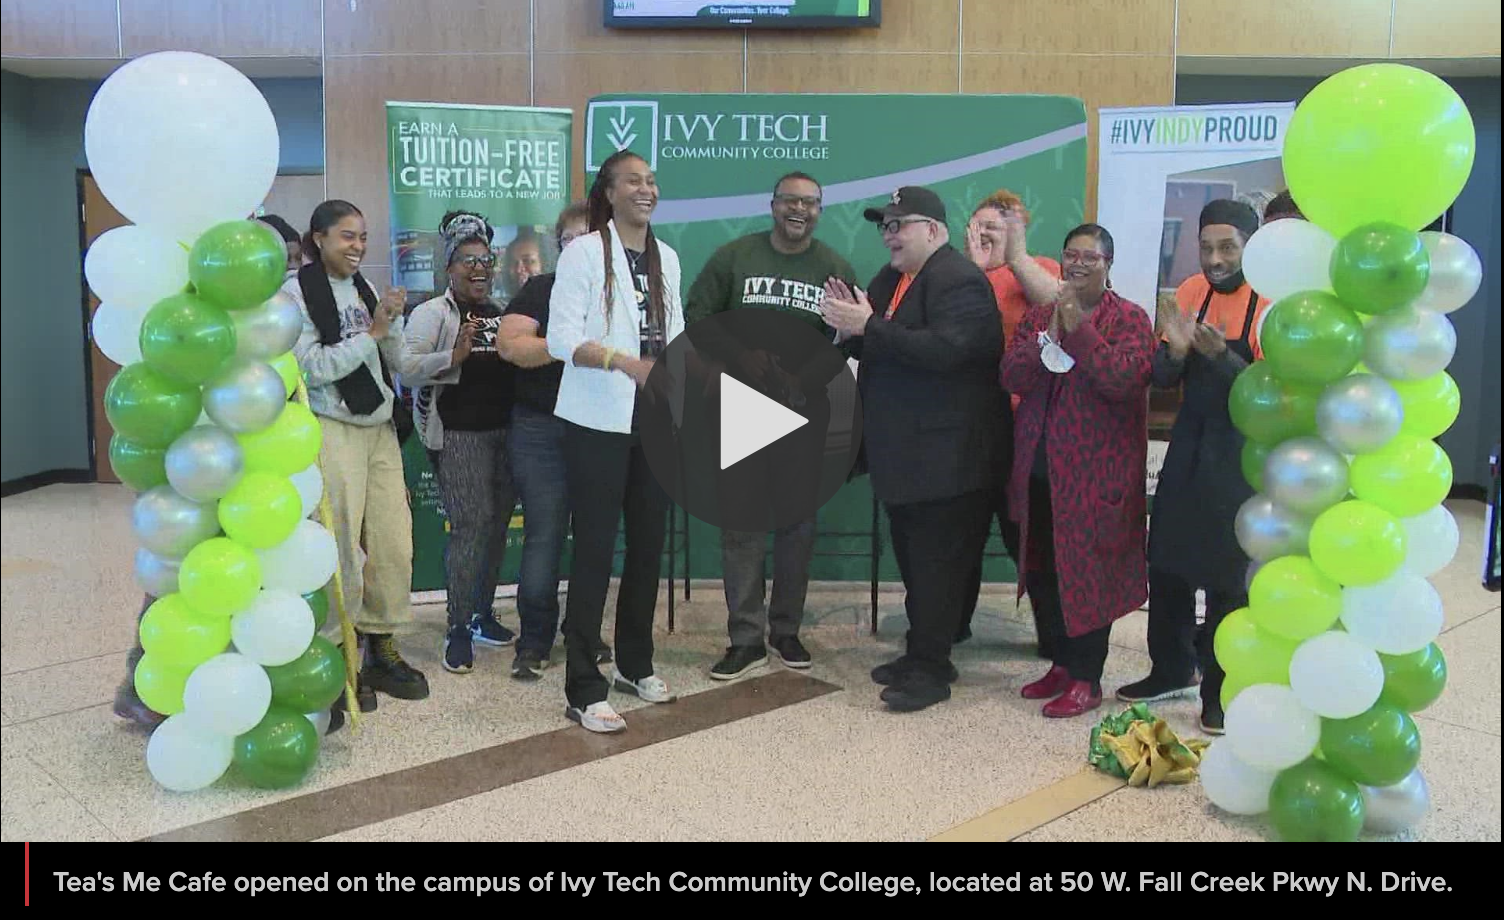 Tamika Catchings opens Tea's Me Cafe on Ivy Tech campus